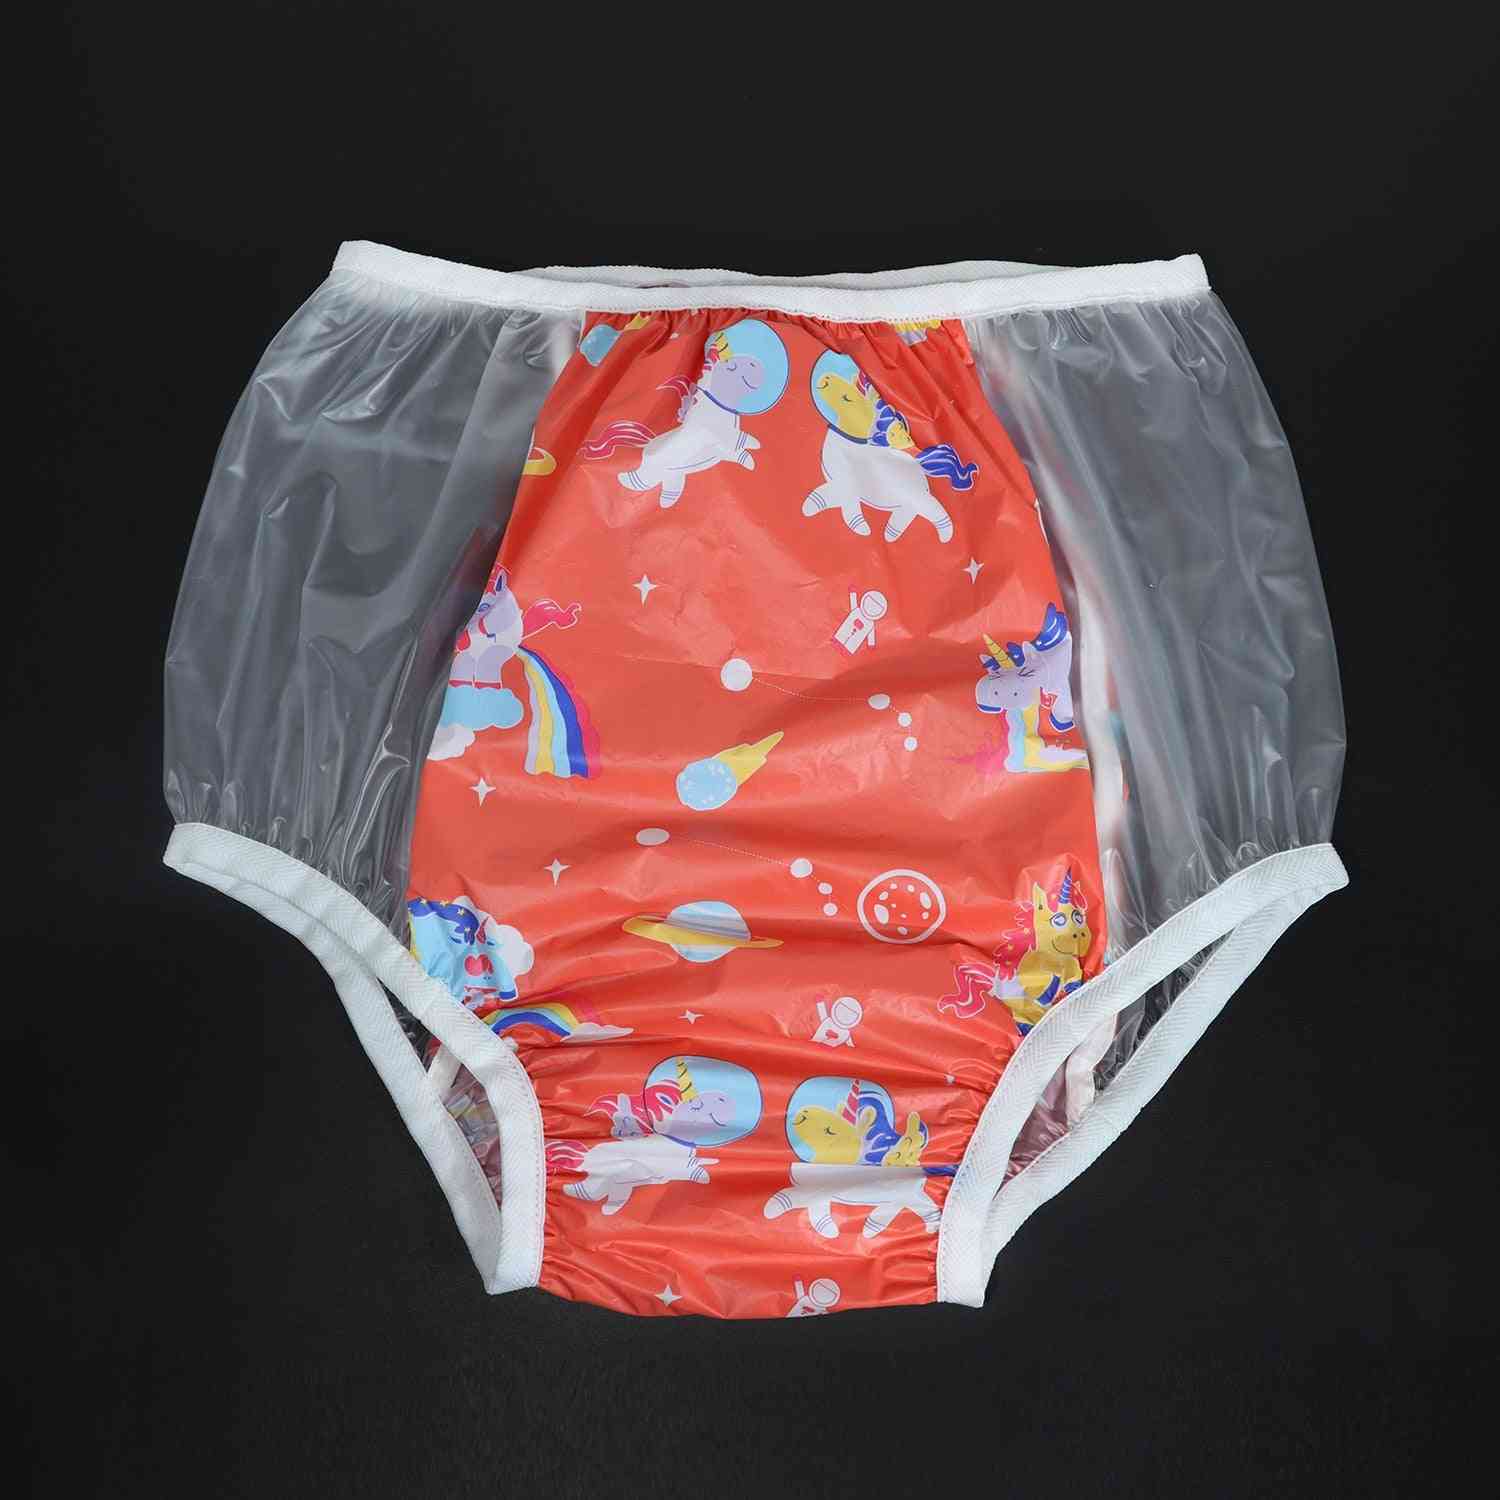 Pvc Reusable Adult Baby Diapers